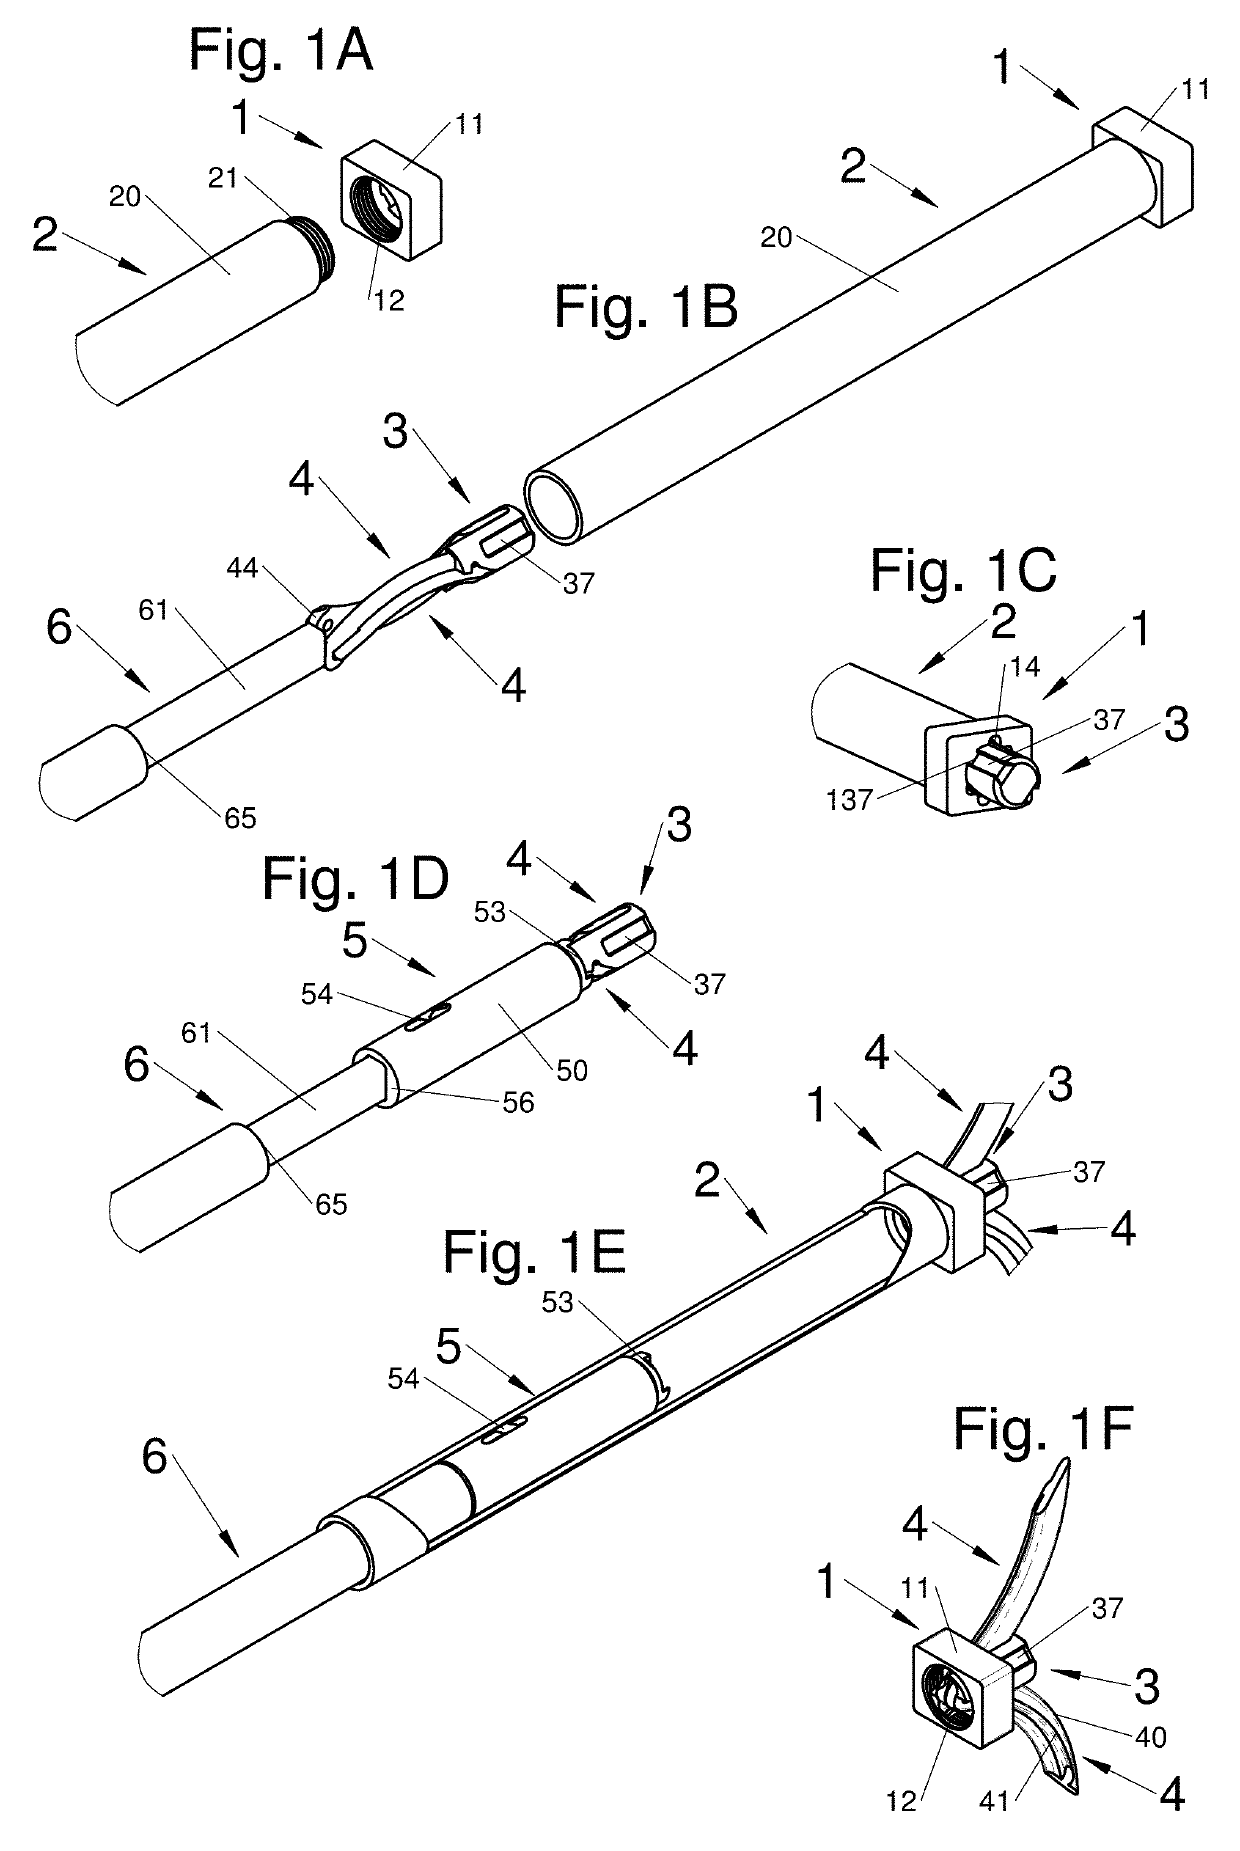 Bone anchoring system, associated implant and instrumentation